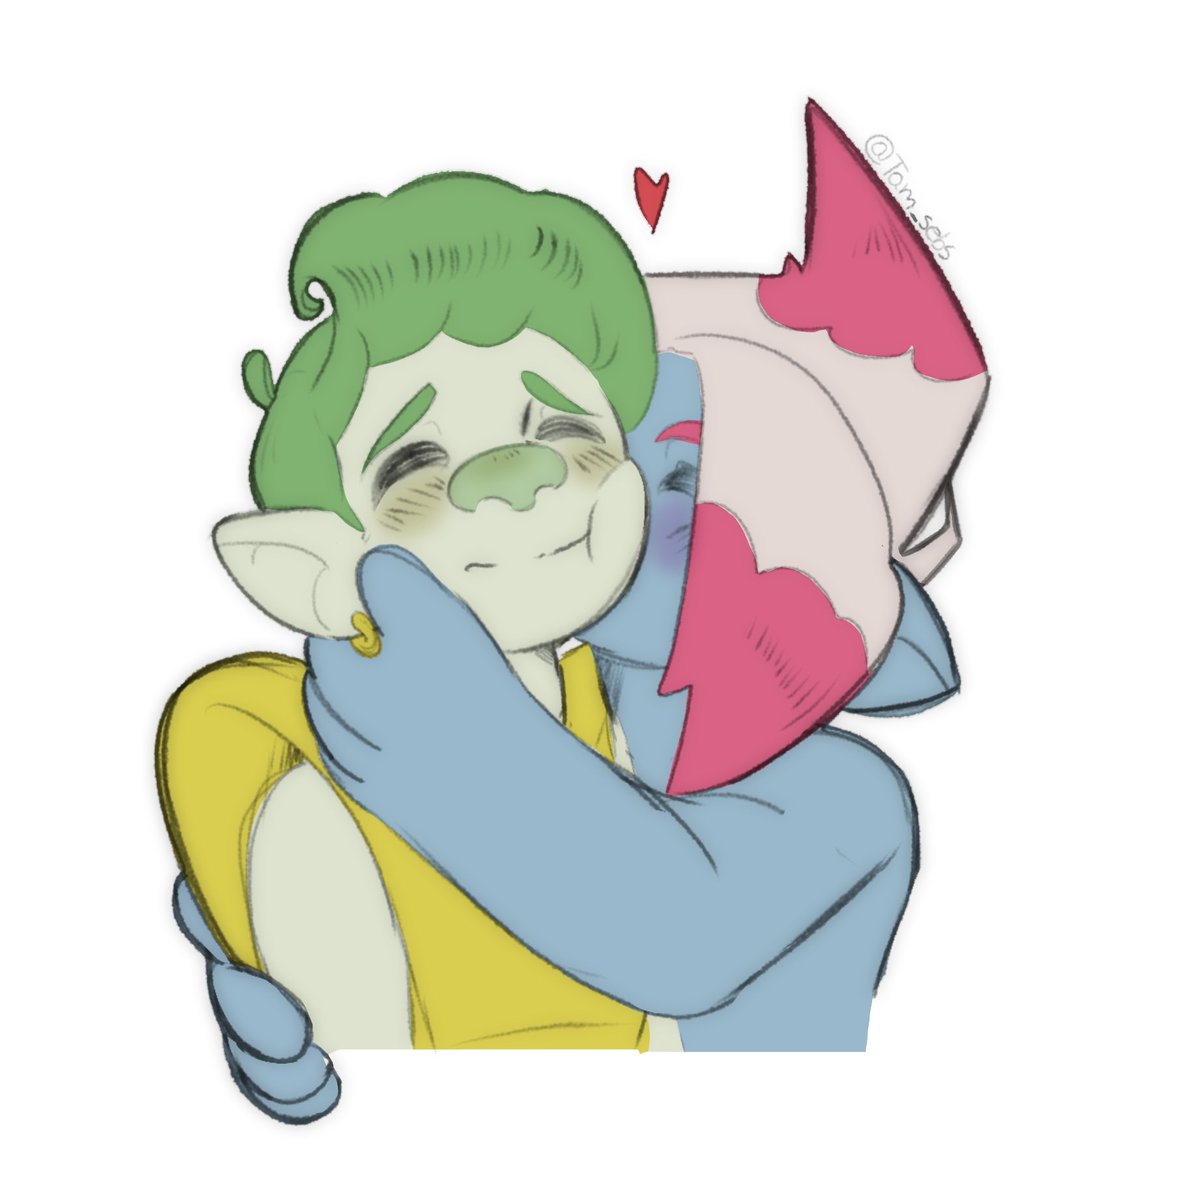 A little doodle of my otp (you can write suggestions from other ships to draw them)
#TrollsBandTogether #floyneer #ValentinesDay    #floydtrolls #TrollsTWT